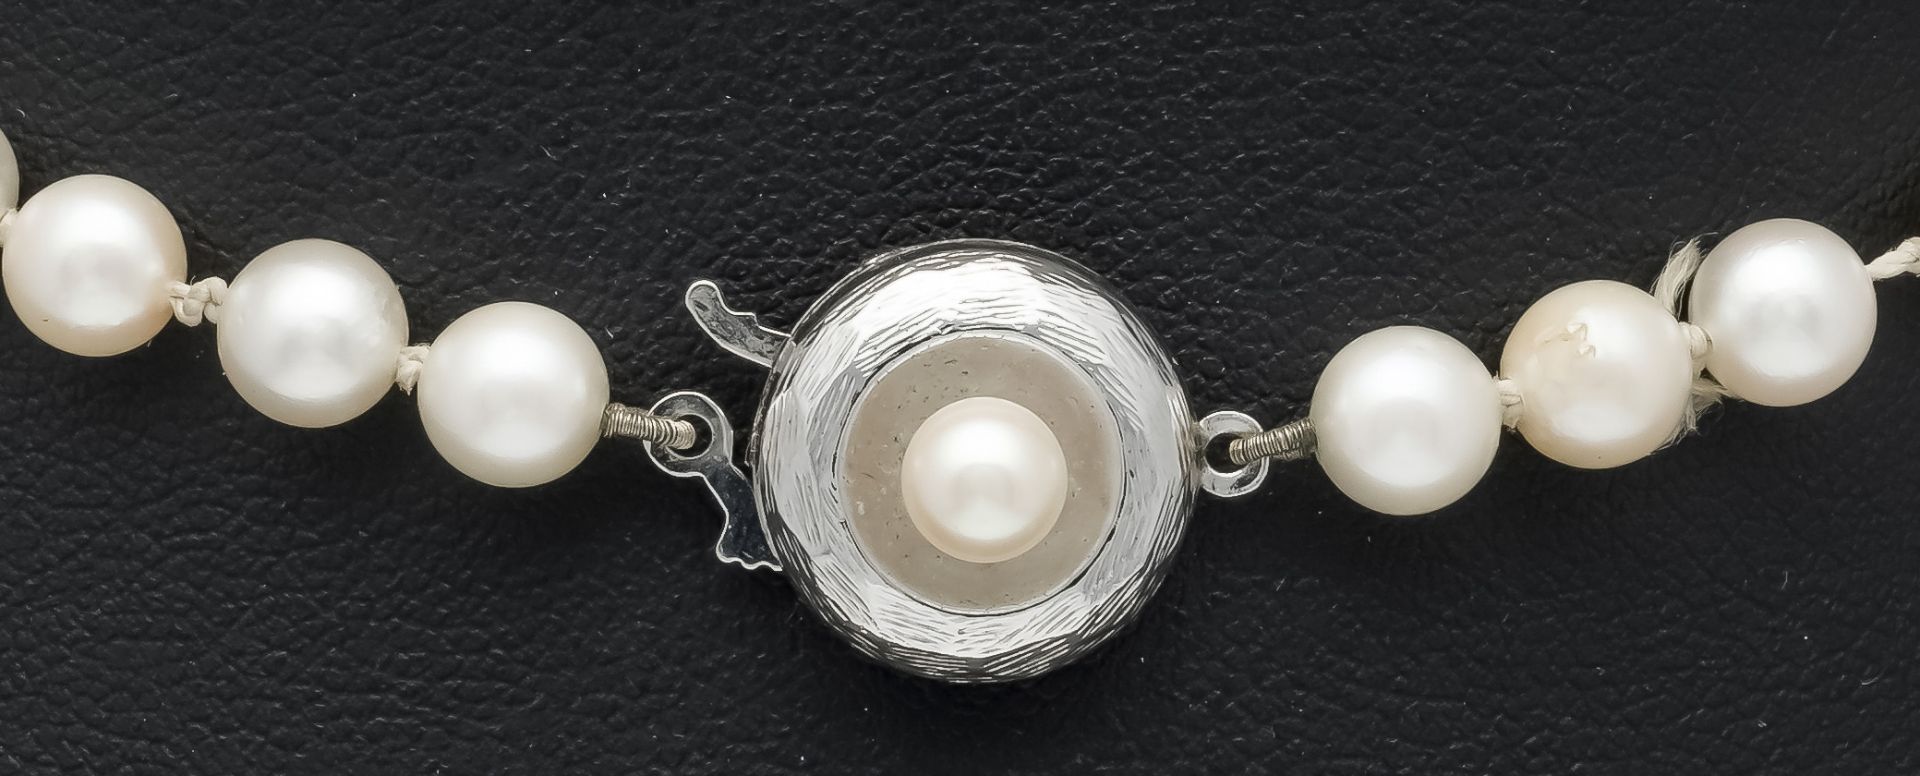 Akoya pearl necklace with pin clasp WG 333/000 set with ceme white Akoya pearl 5 mm, strand of - Image 2 of 2